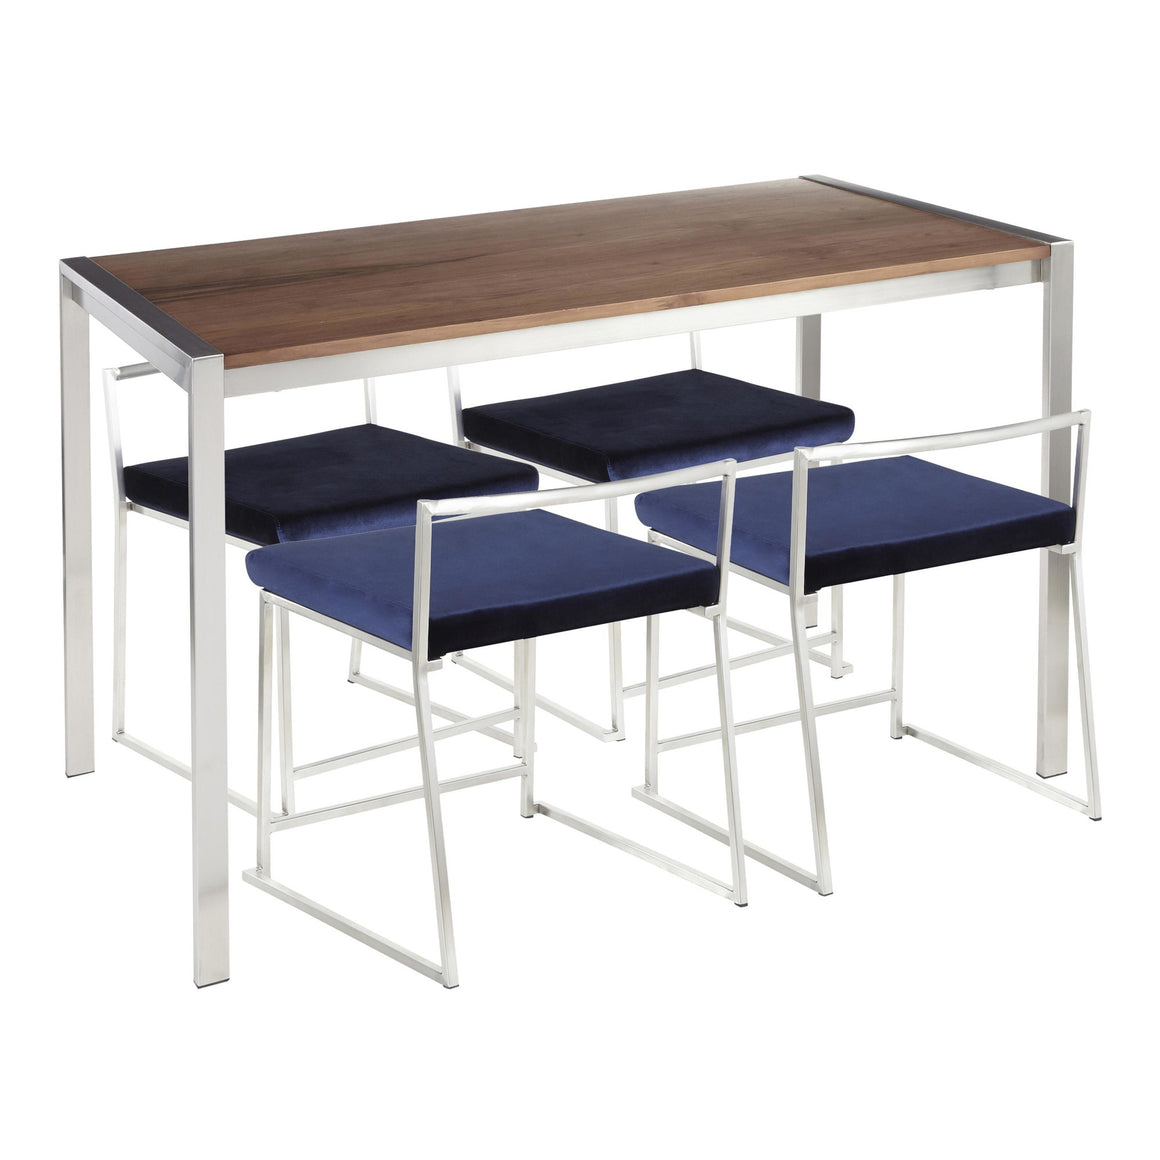 Fuji 5-Piece Contemporary Dining Set in Stainless Steel, Walnut Wood and Blue Velvet Fabric by LumiSource